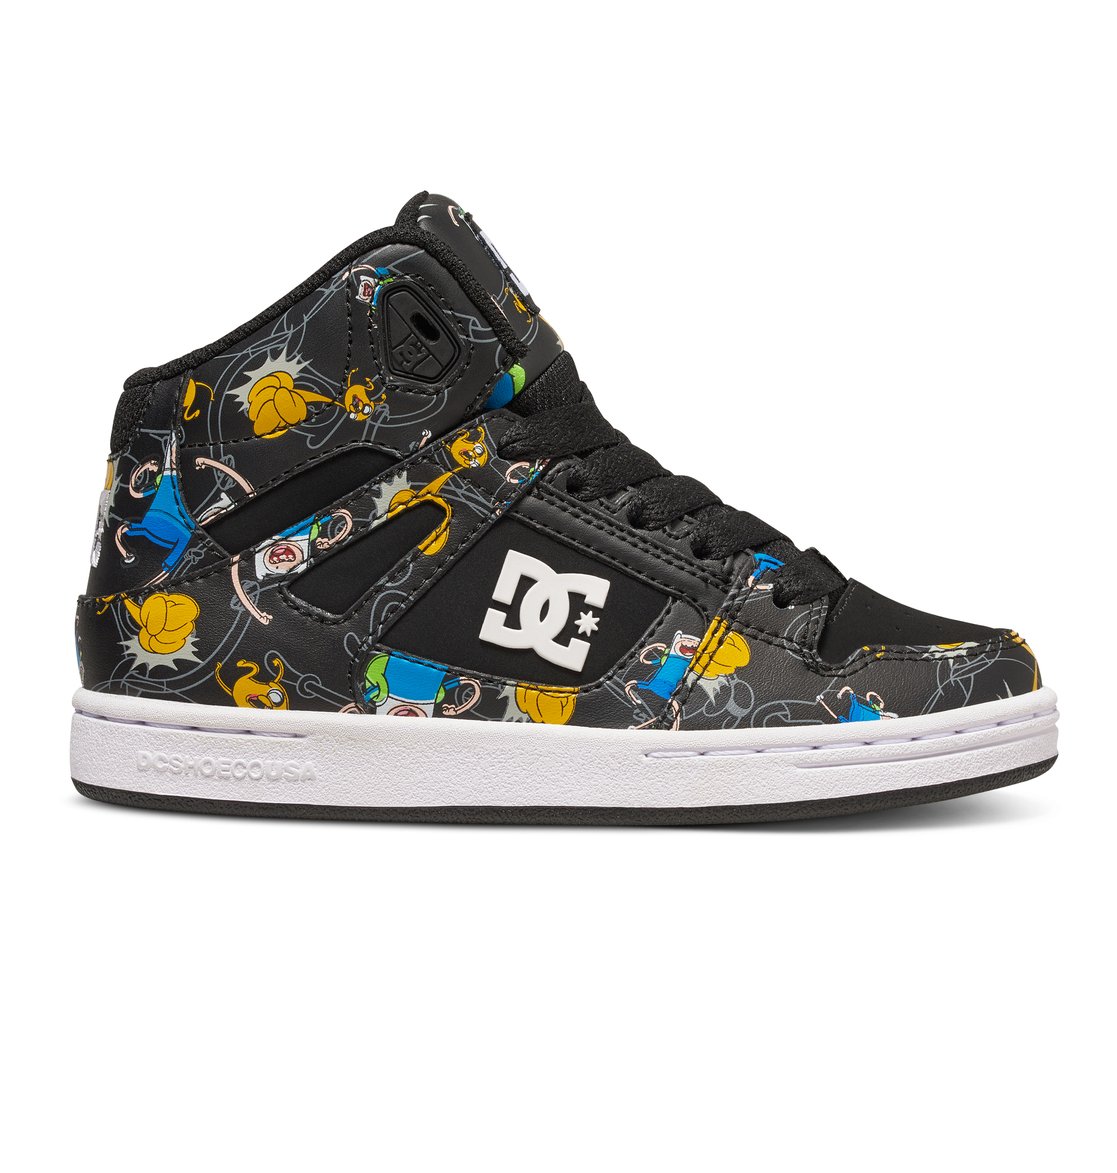 Boy's 47 Rebound X AT High Top Shoes ADBS100189 DC Shoes